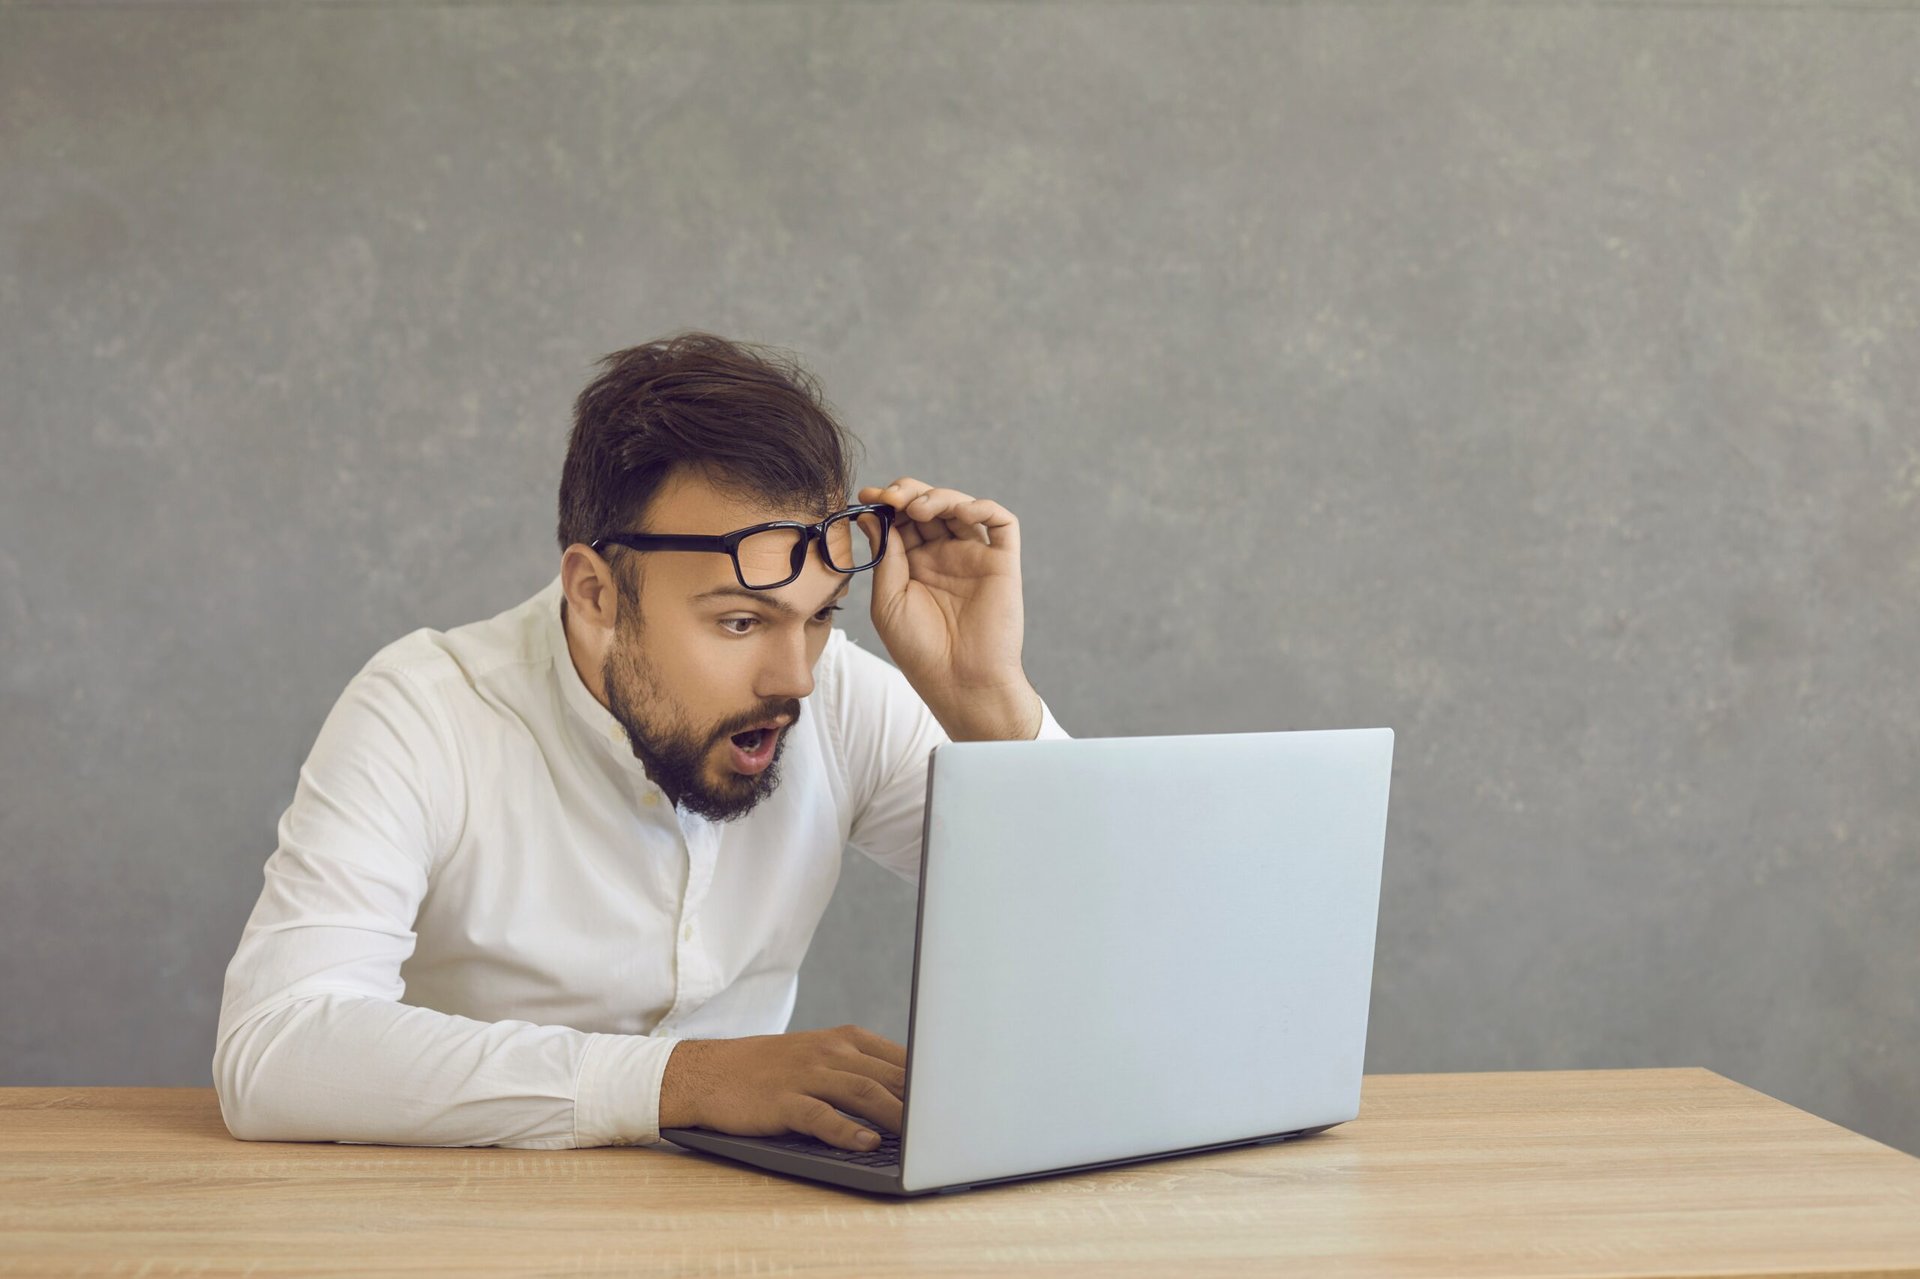 Shocked remote worker or business person using a laptop looking surprised and taking off glasses